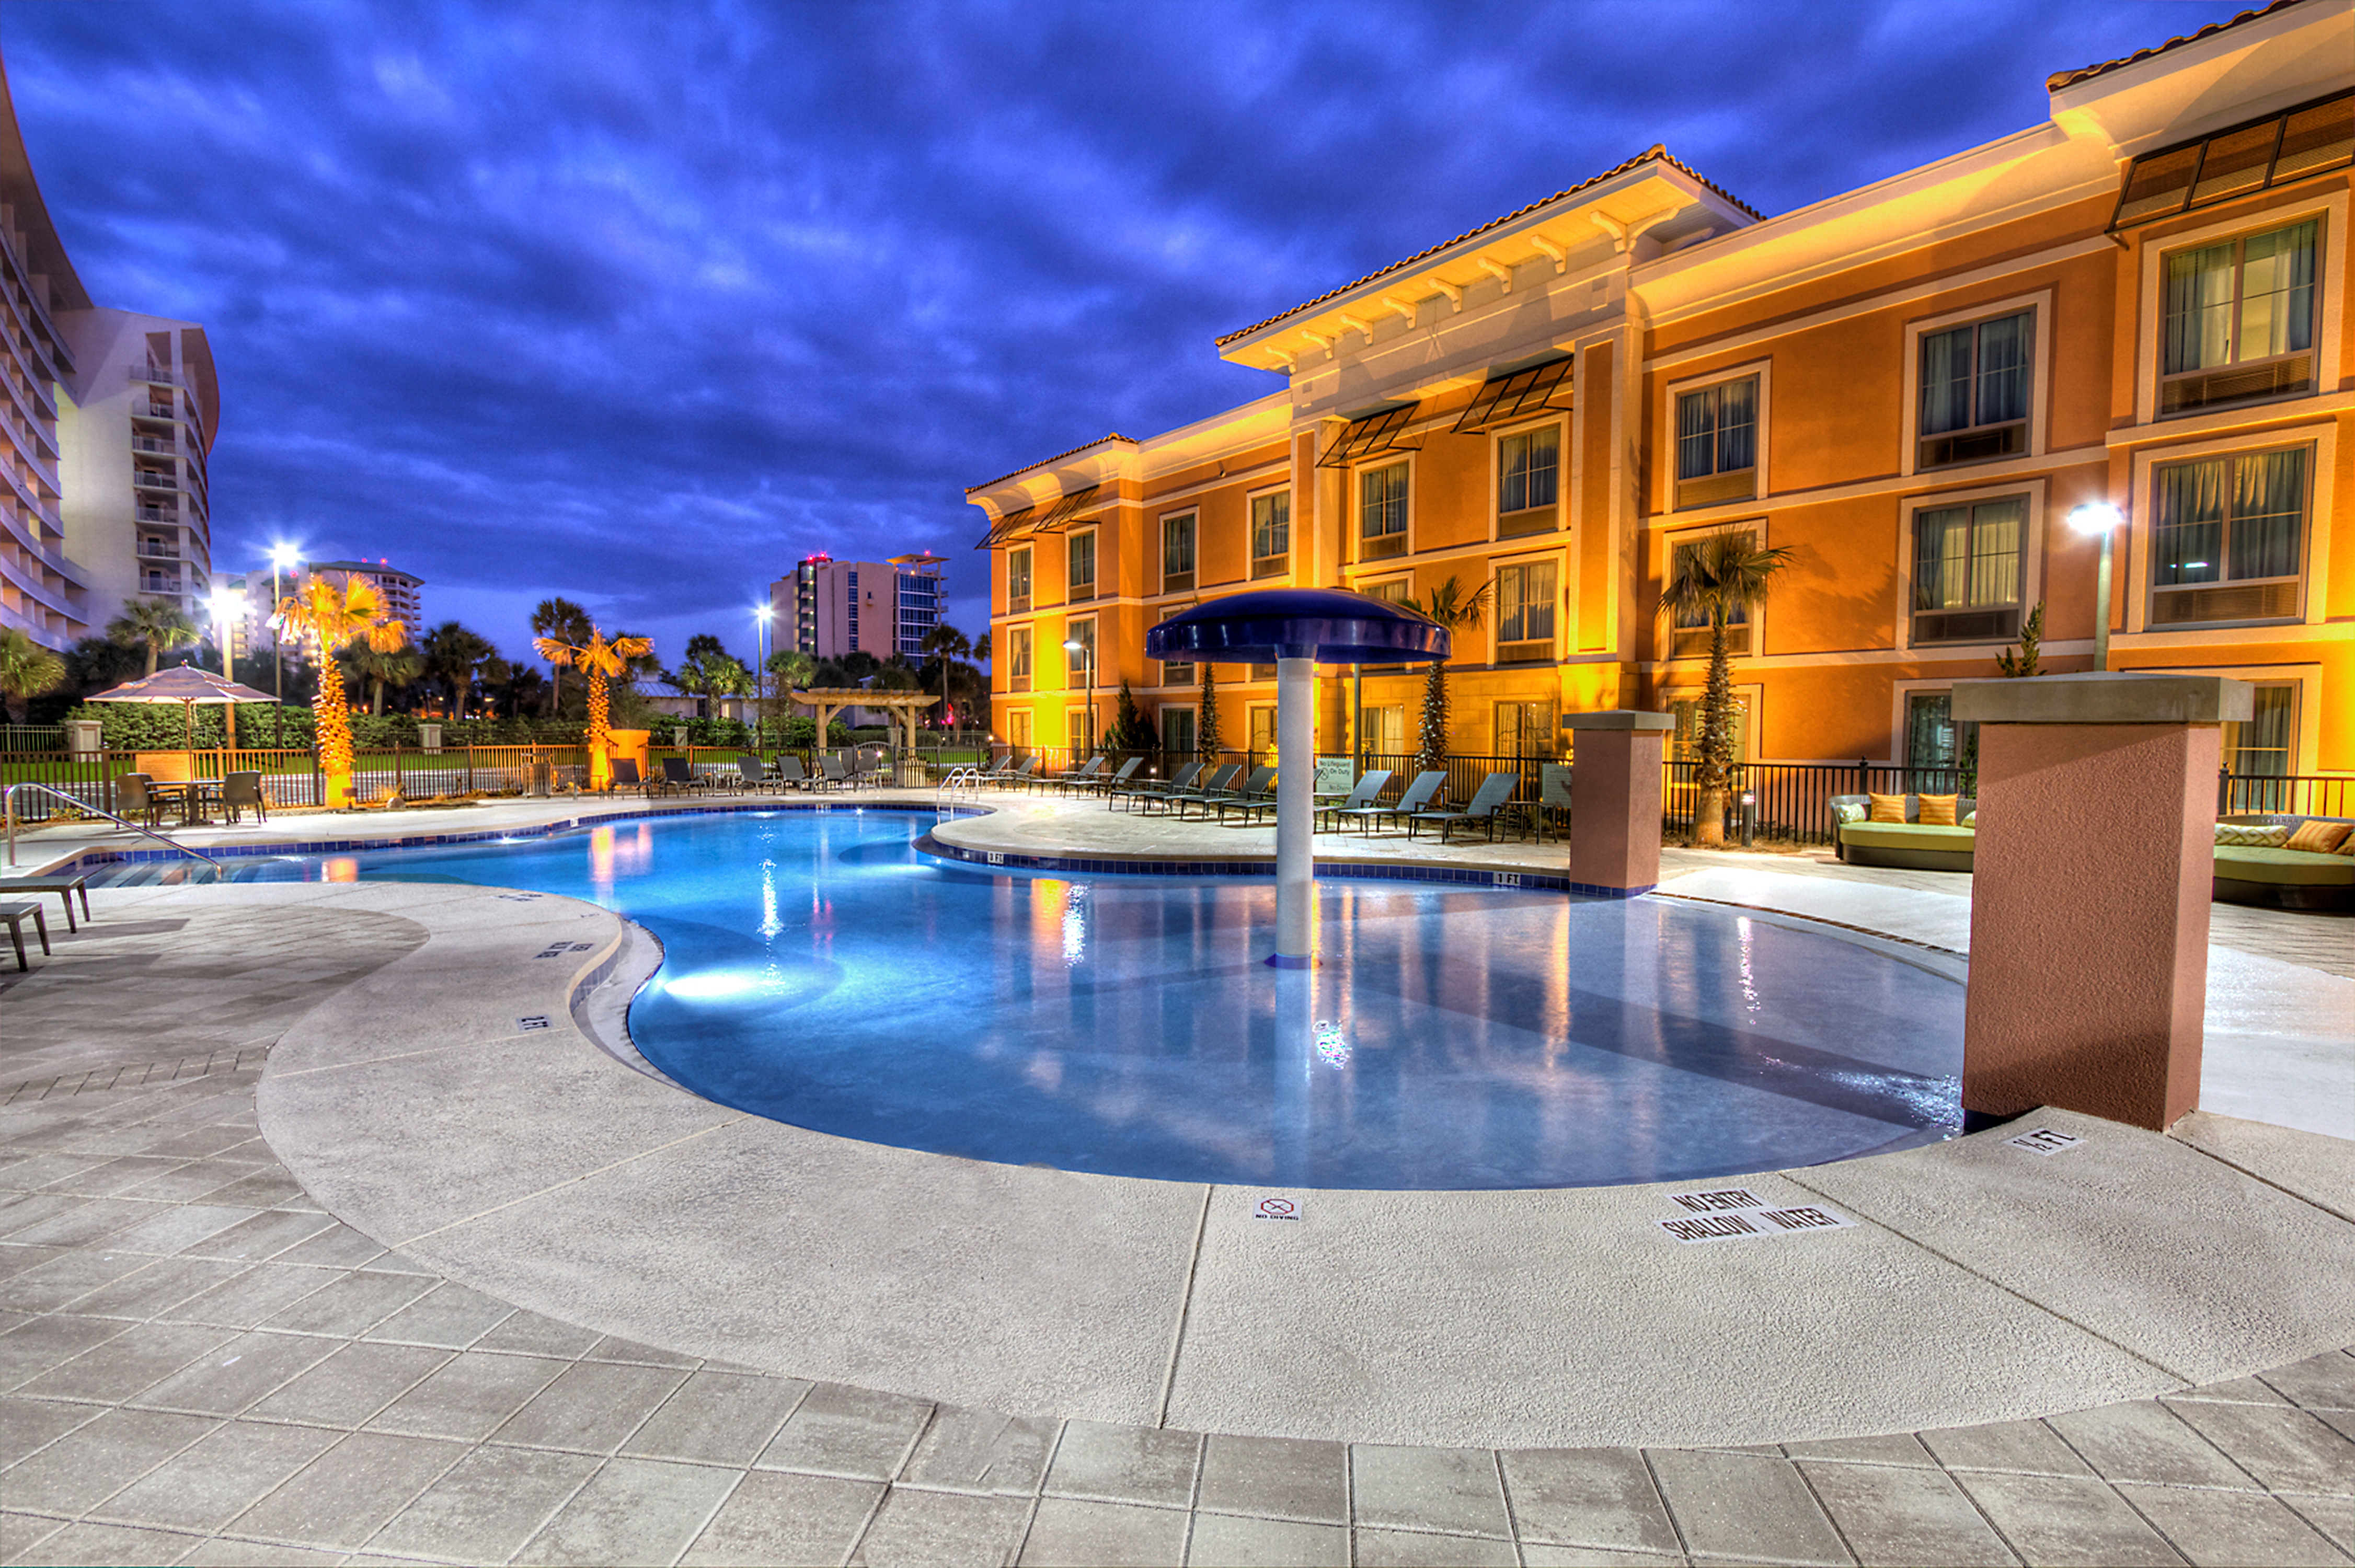 Outdoor Pool at Night